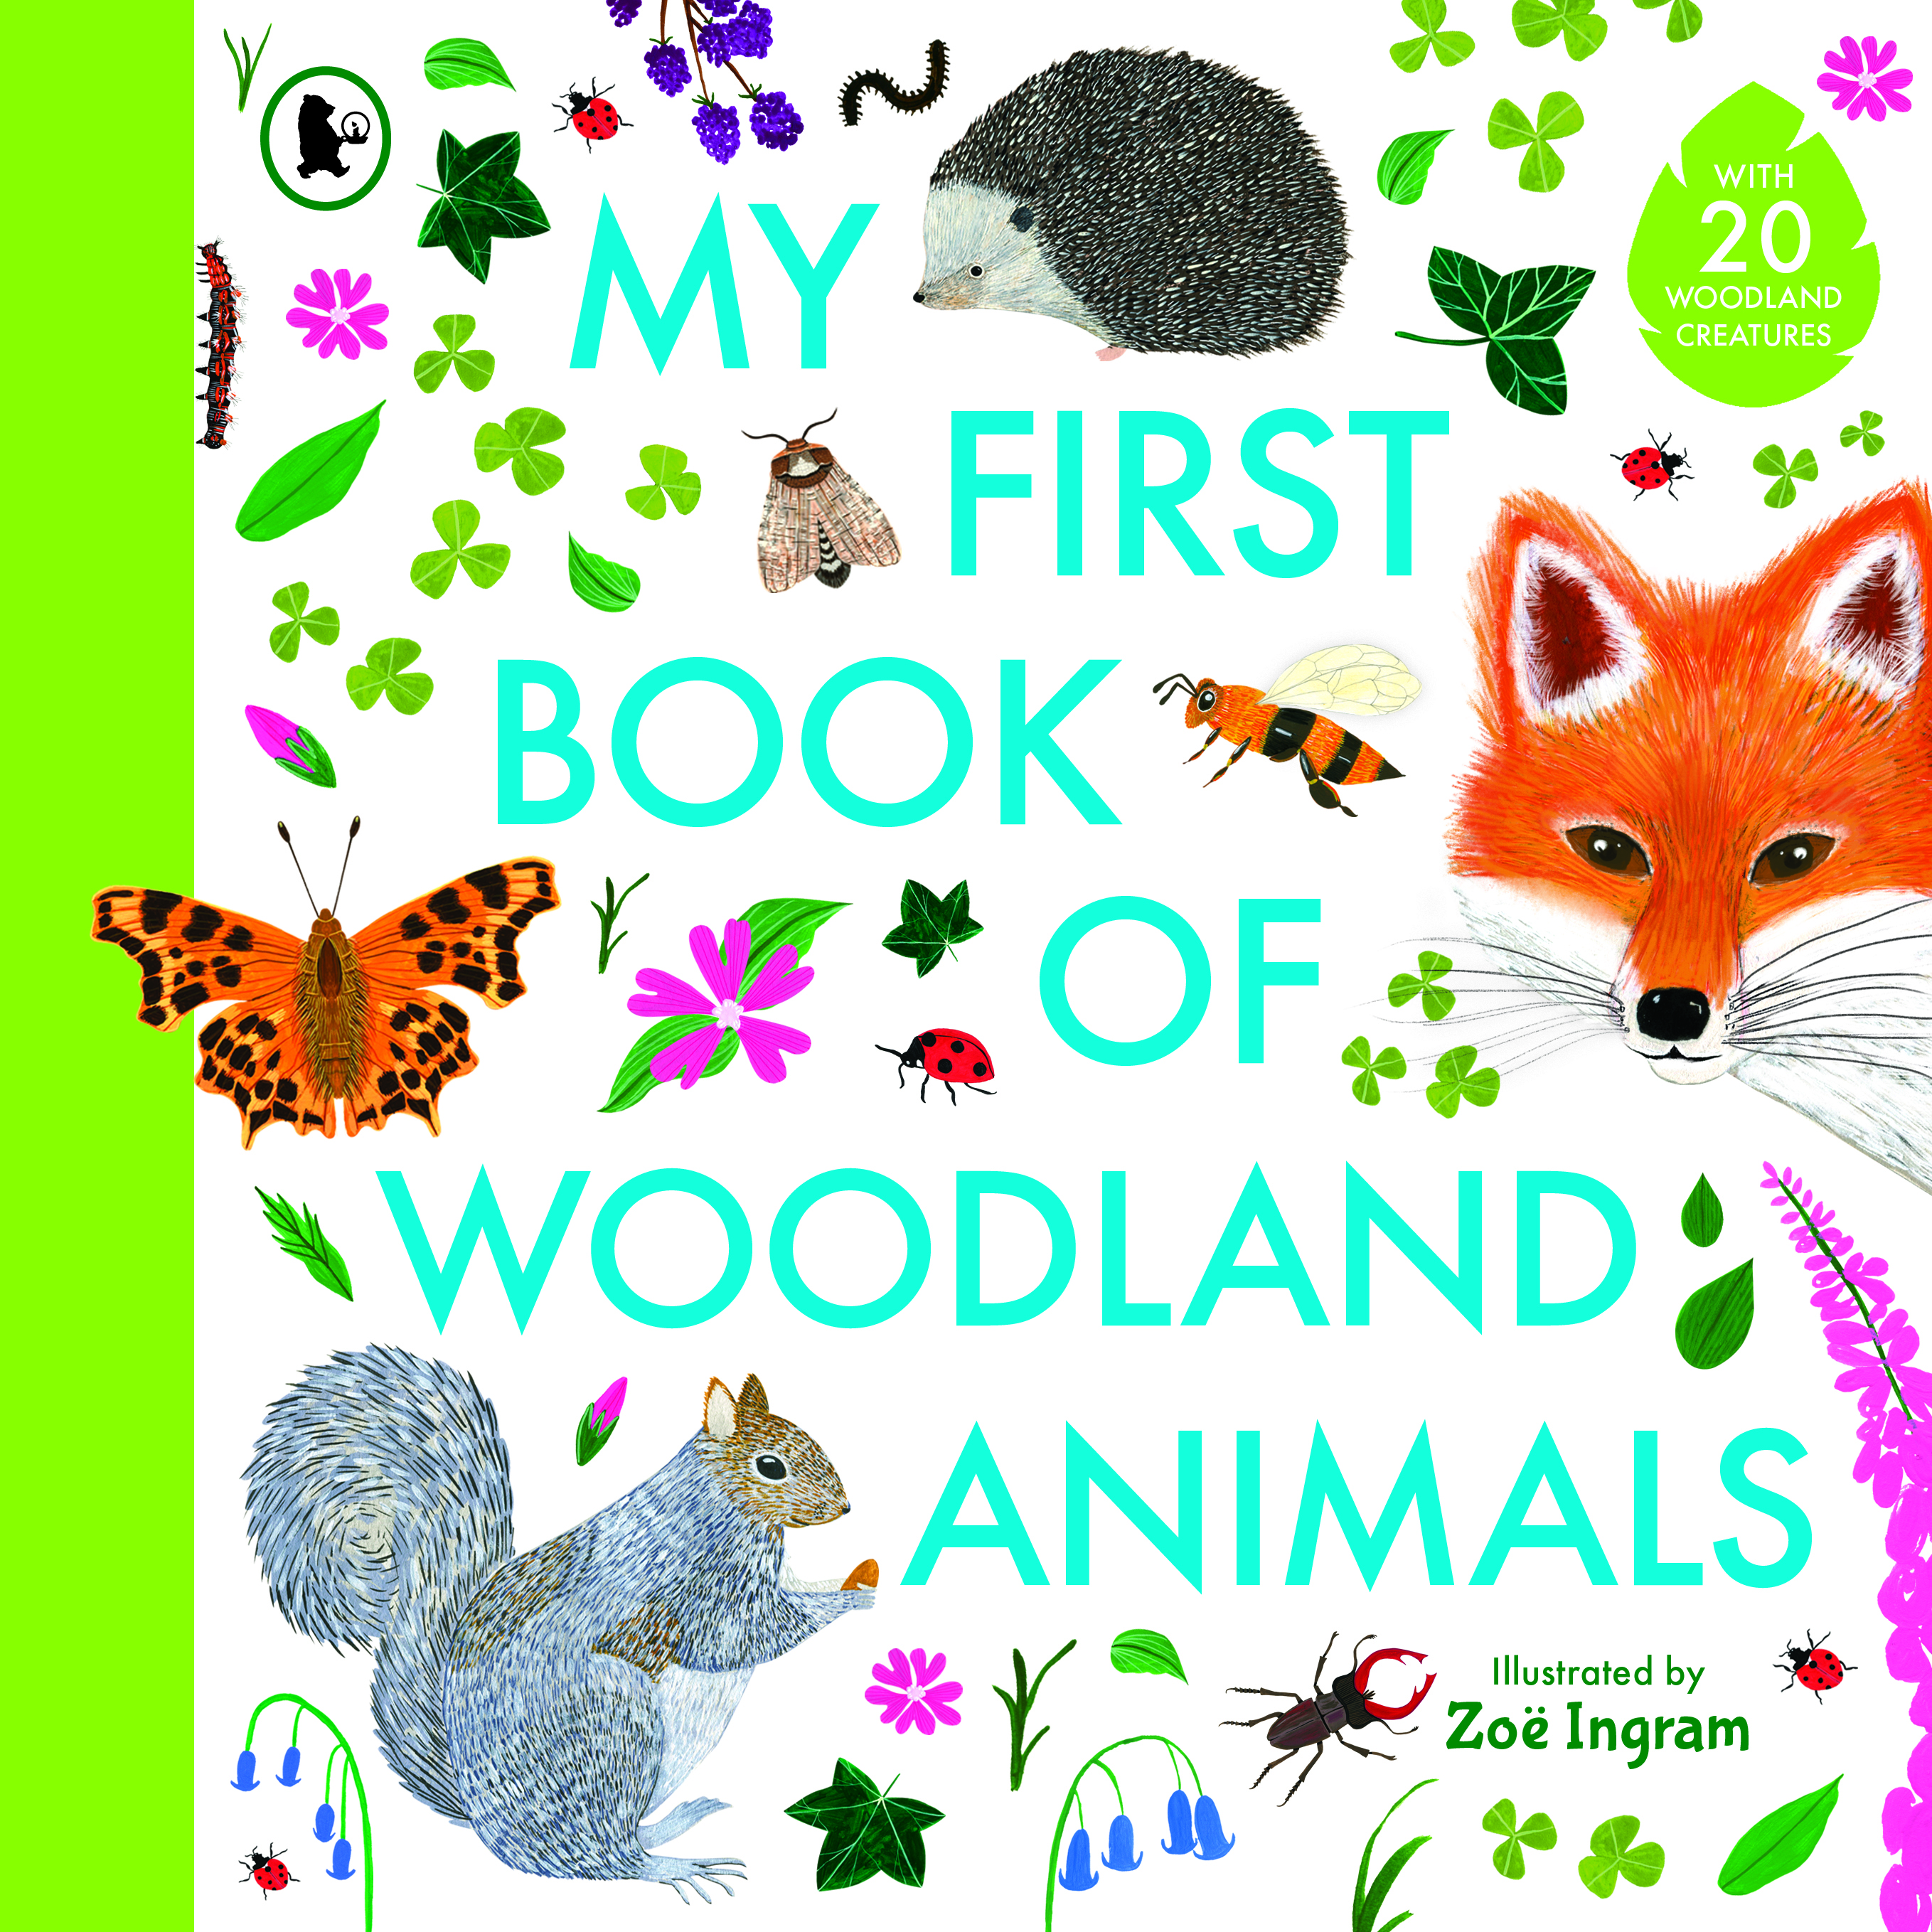 My-First-Book-of-Woodland-Animals